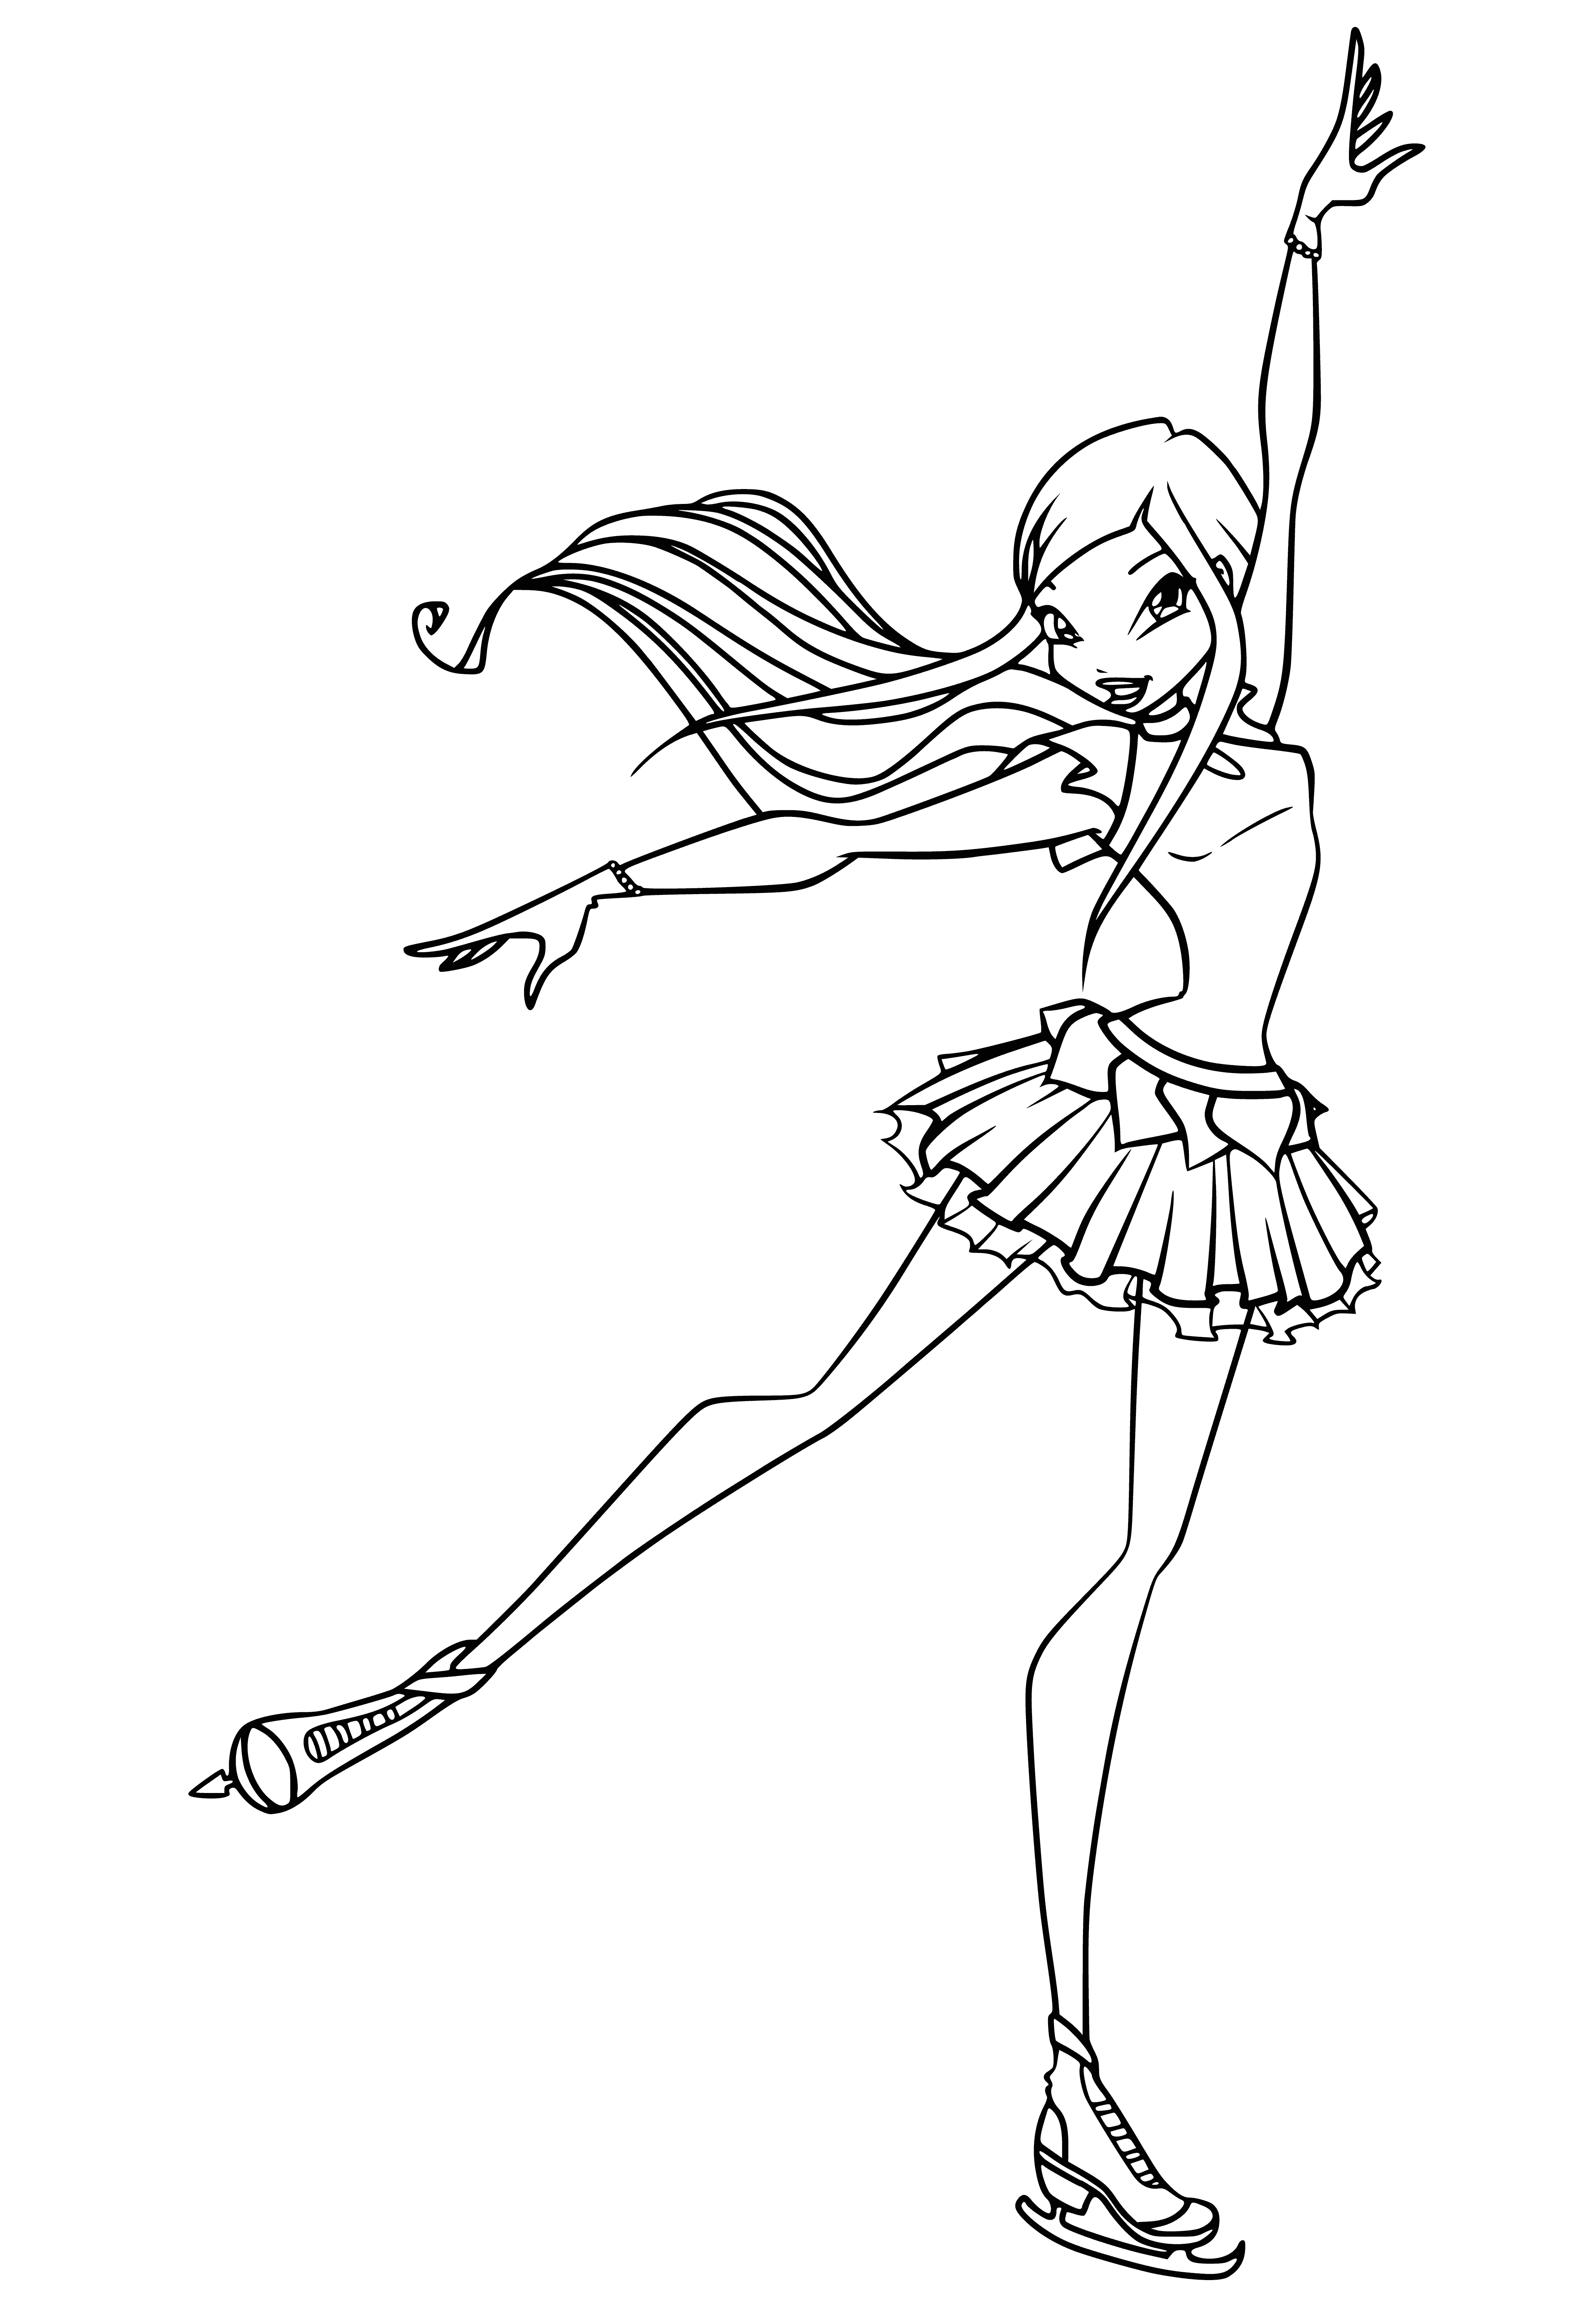 coloring page: Skaters performing jumps and spins on an indoor rink, lit up by overhead lights reflecting off the glossy surface.